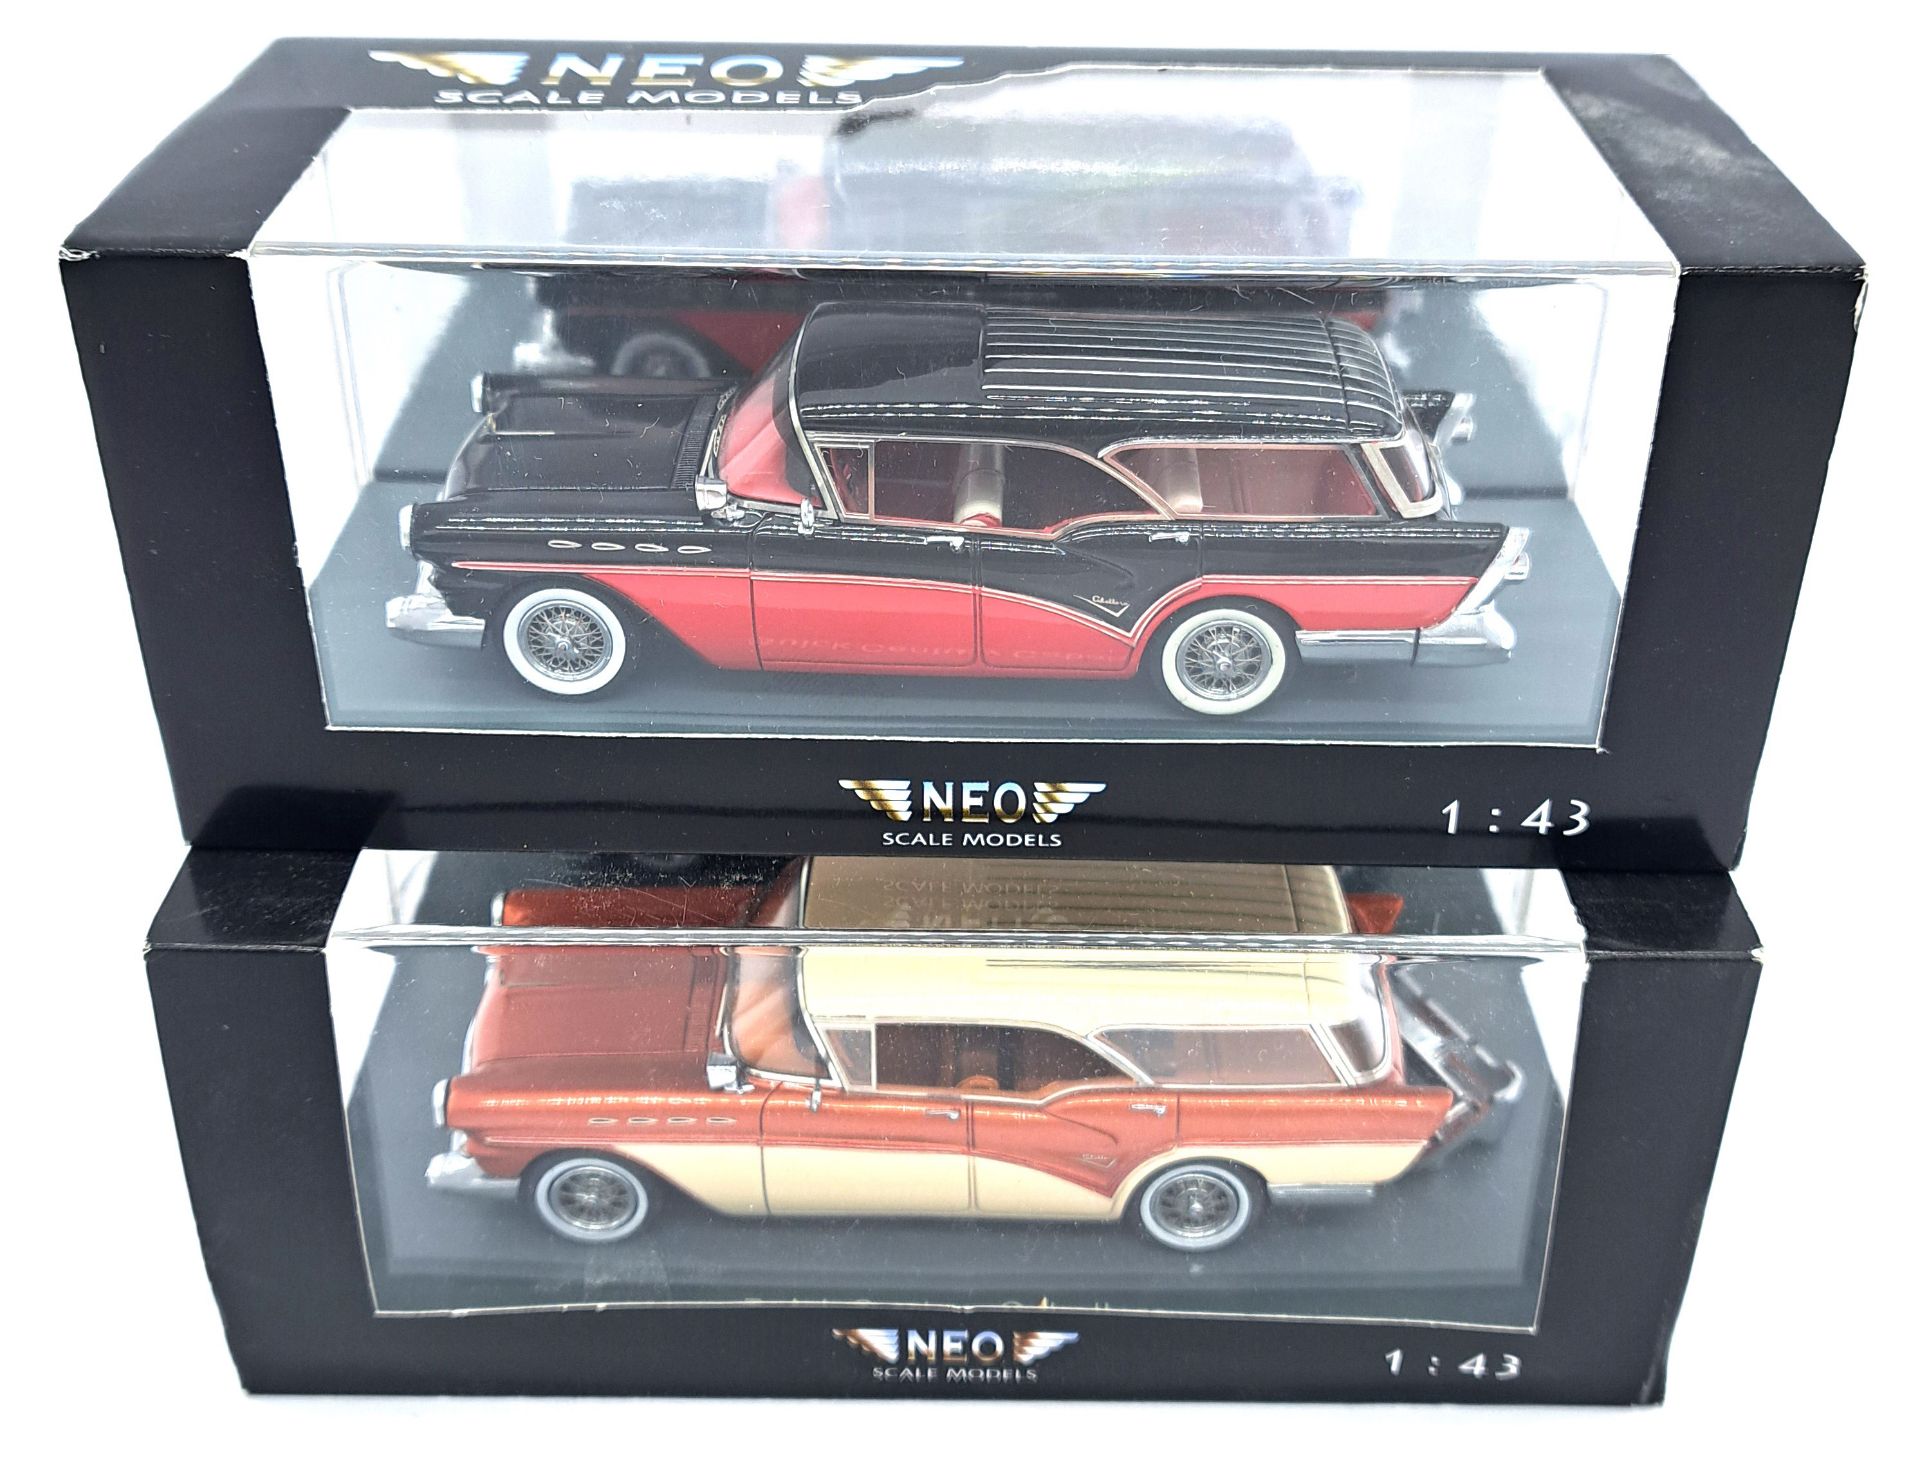 NEO Scale Models, a boxed 1:43 scale pair